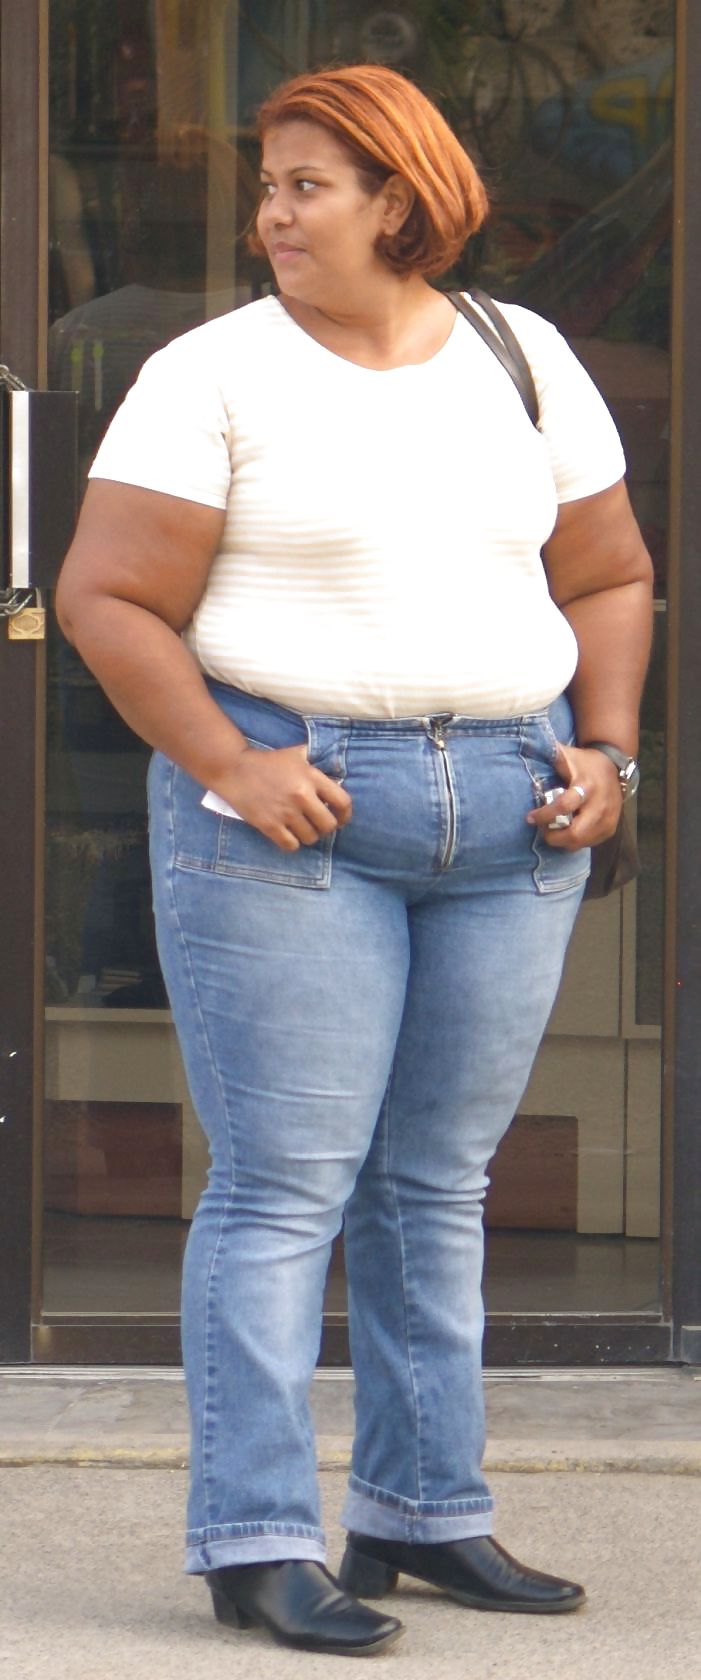 BBW in Tight Jeans! Collection #2 #17276445